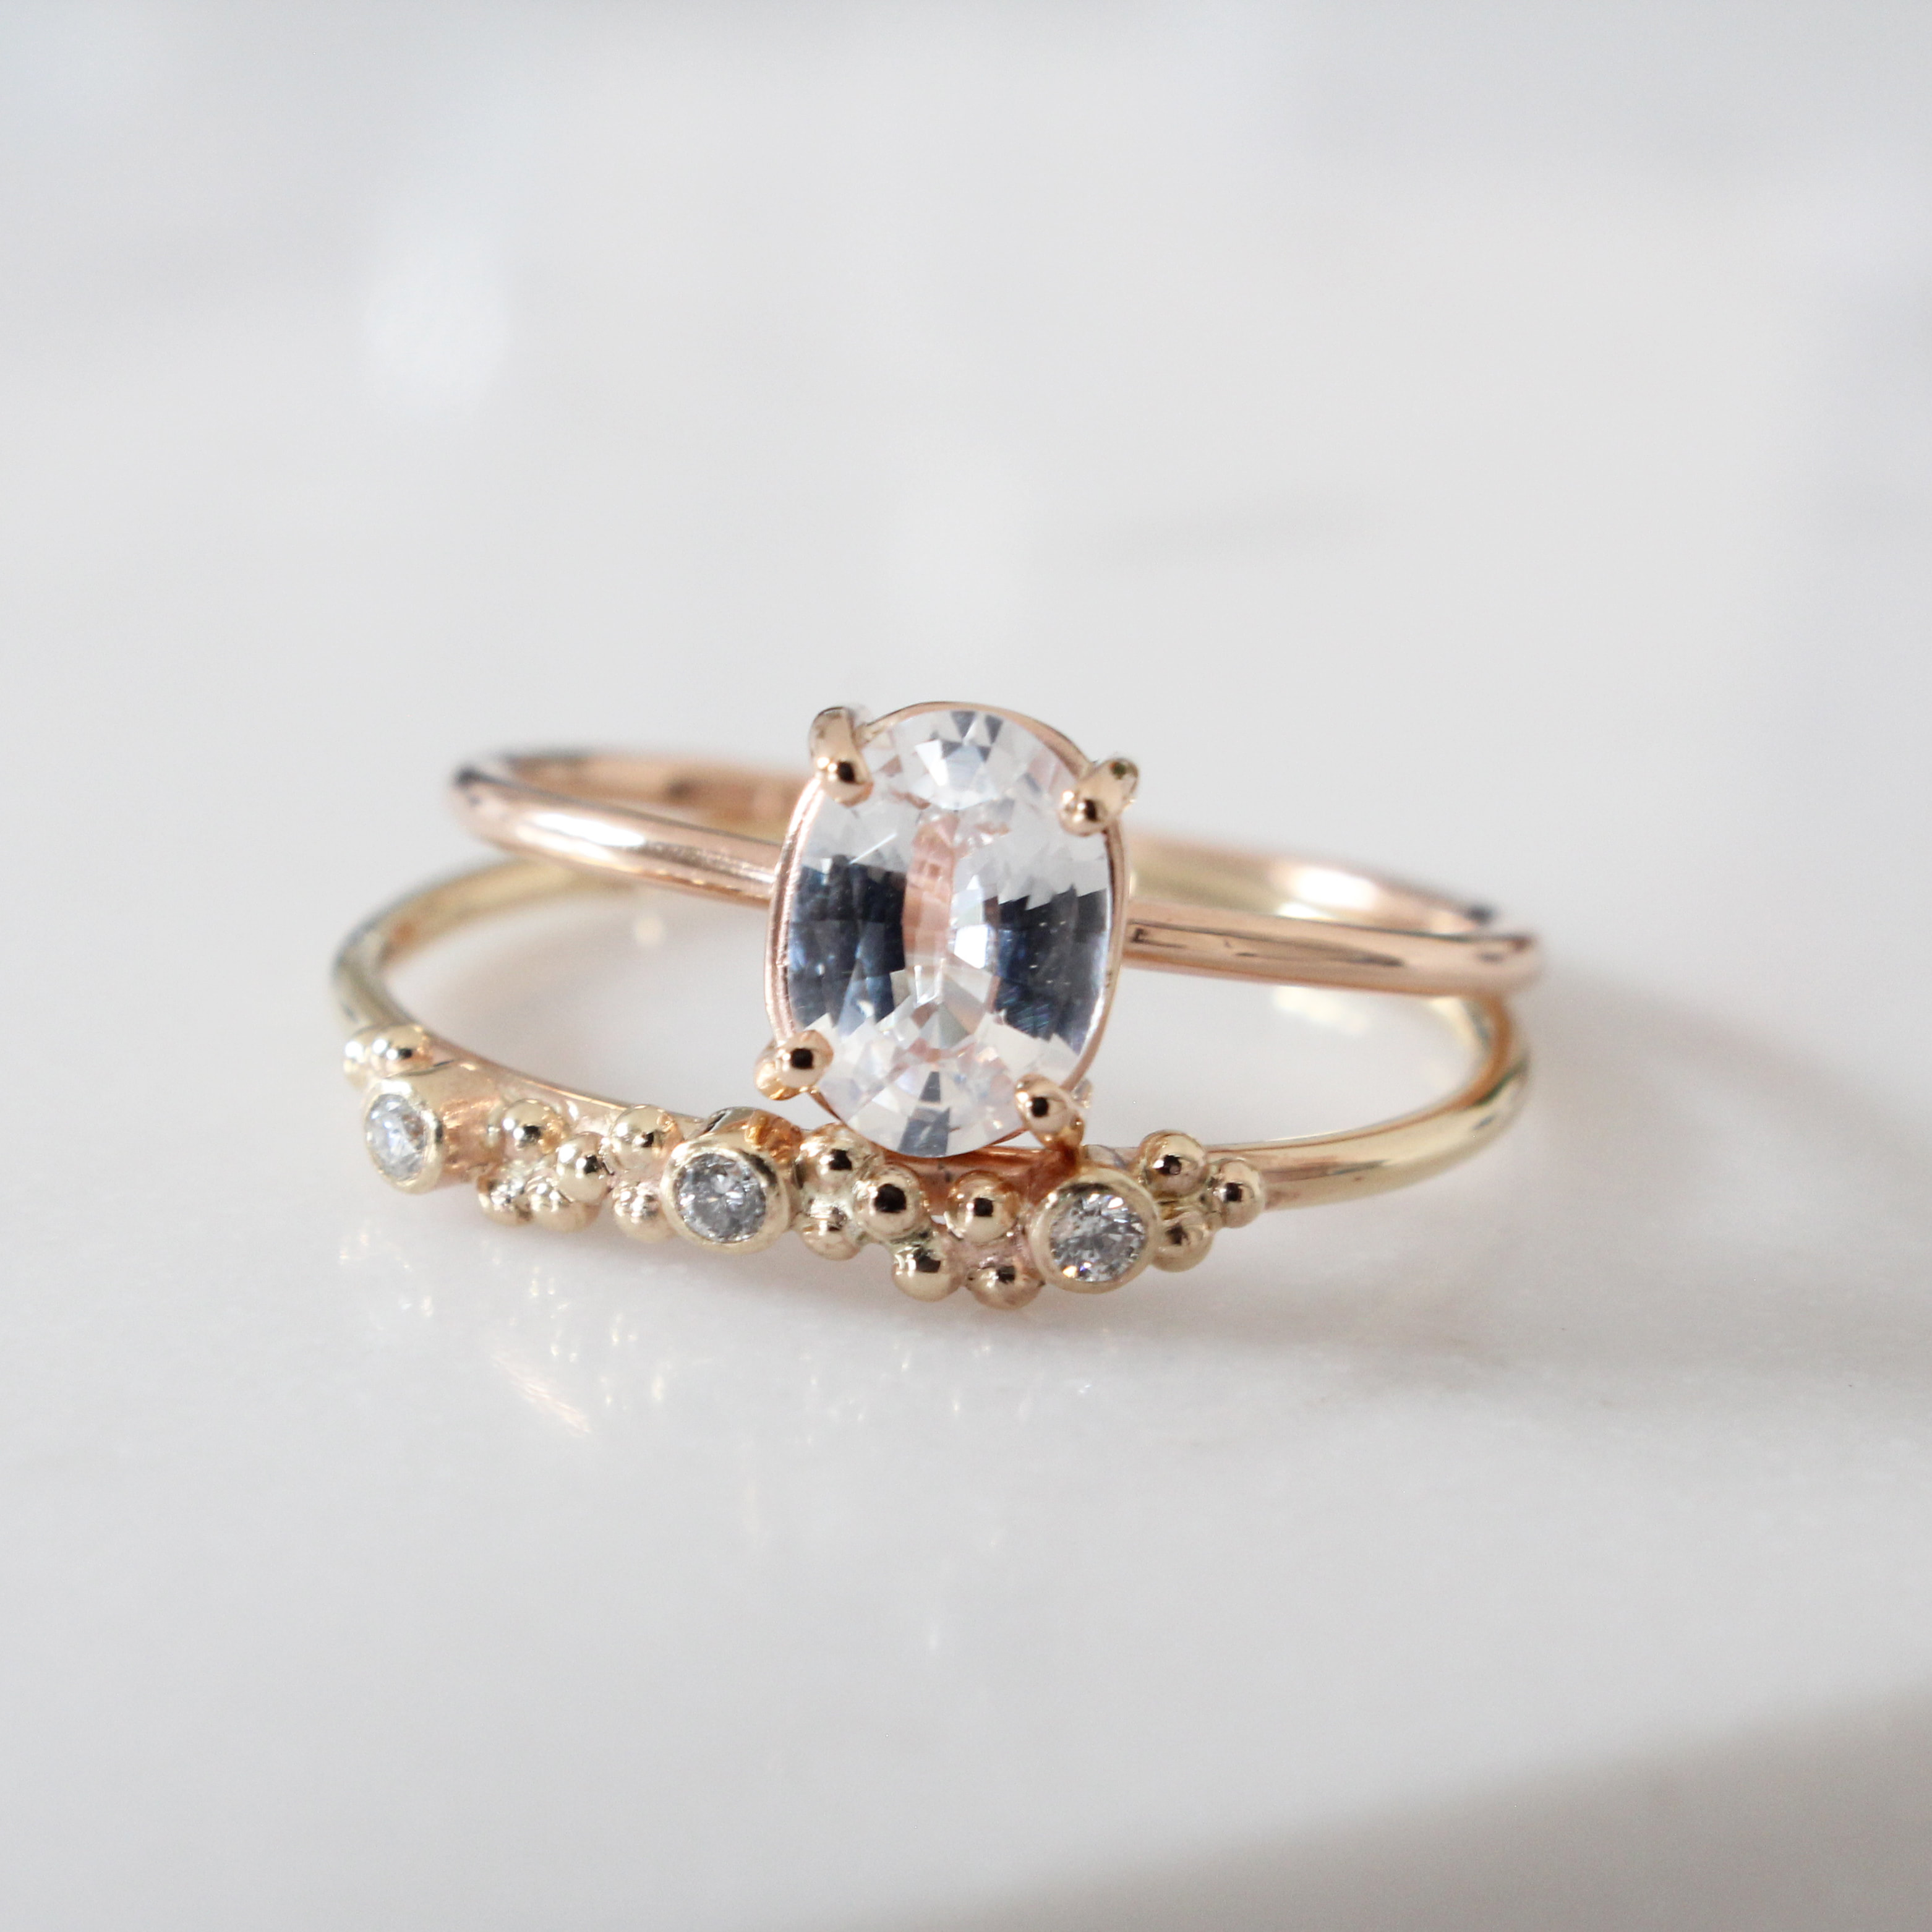 Blue & White Sapphire Engagement Ring | Jewelry by Johan - Jewelry by Johan